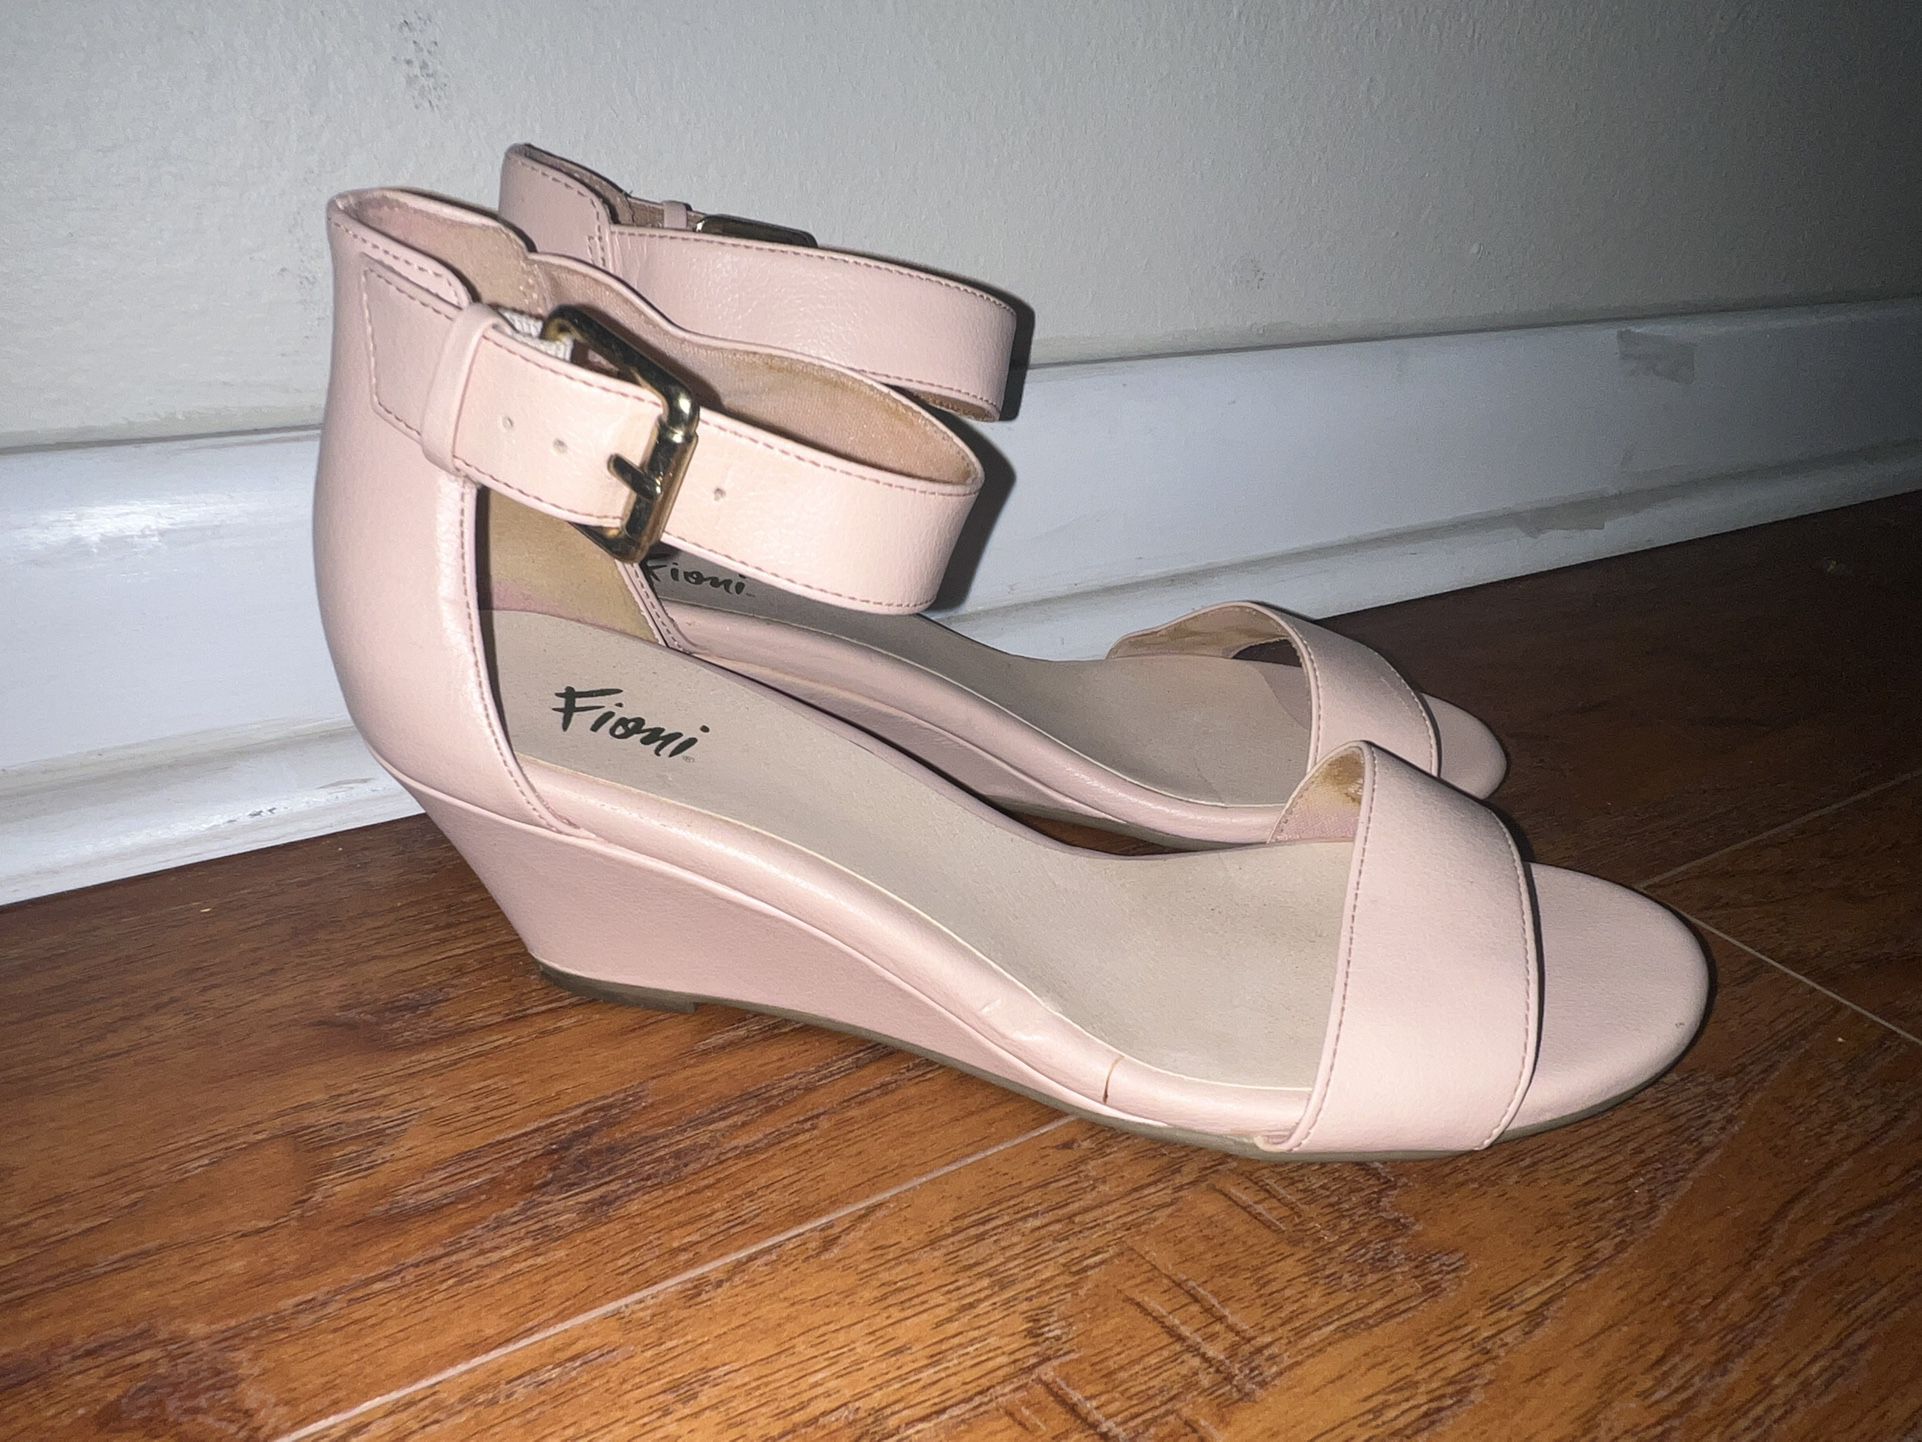 Used Fioni Sandals Wedges Low Heel Blush Pink Beige Womens 8.5